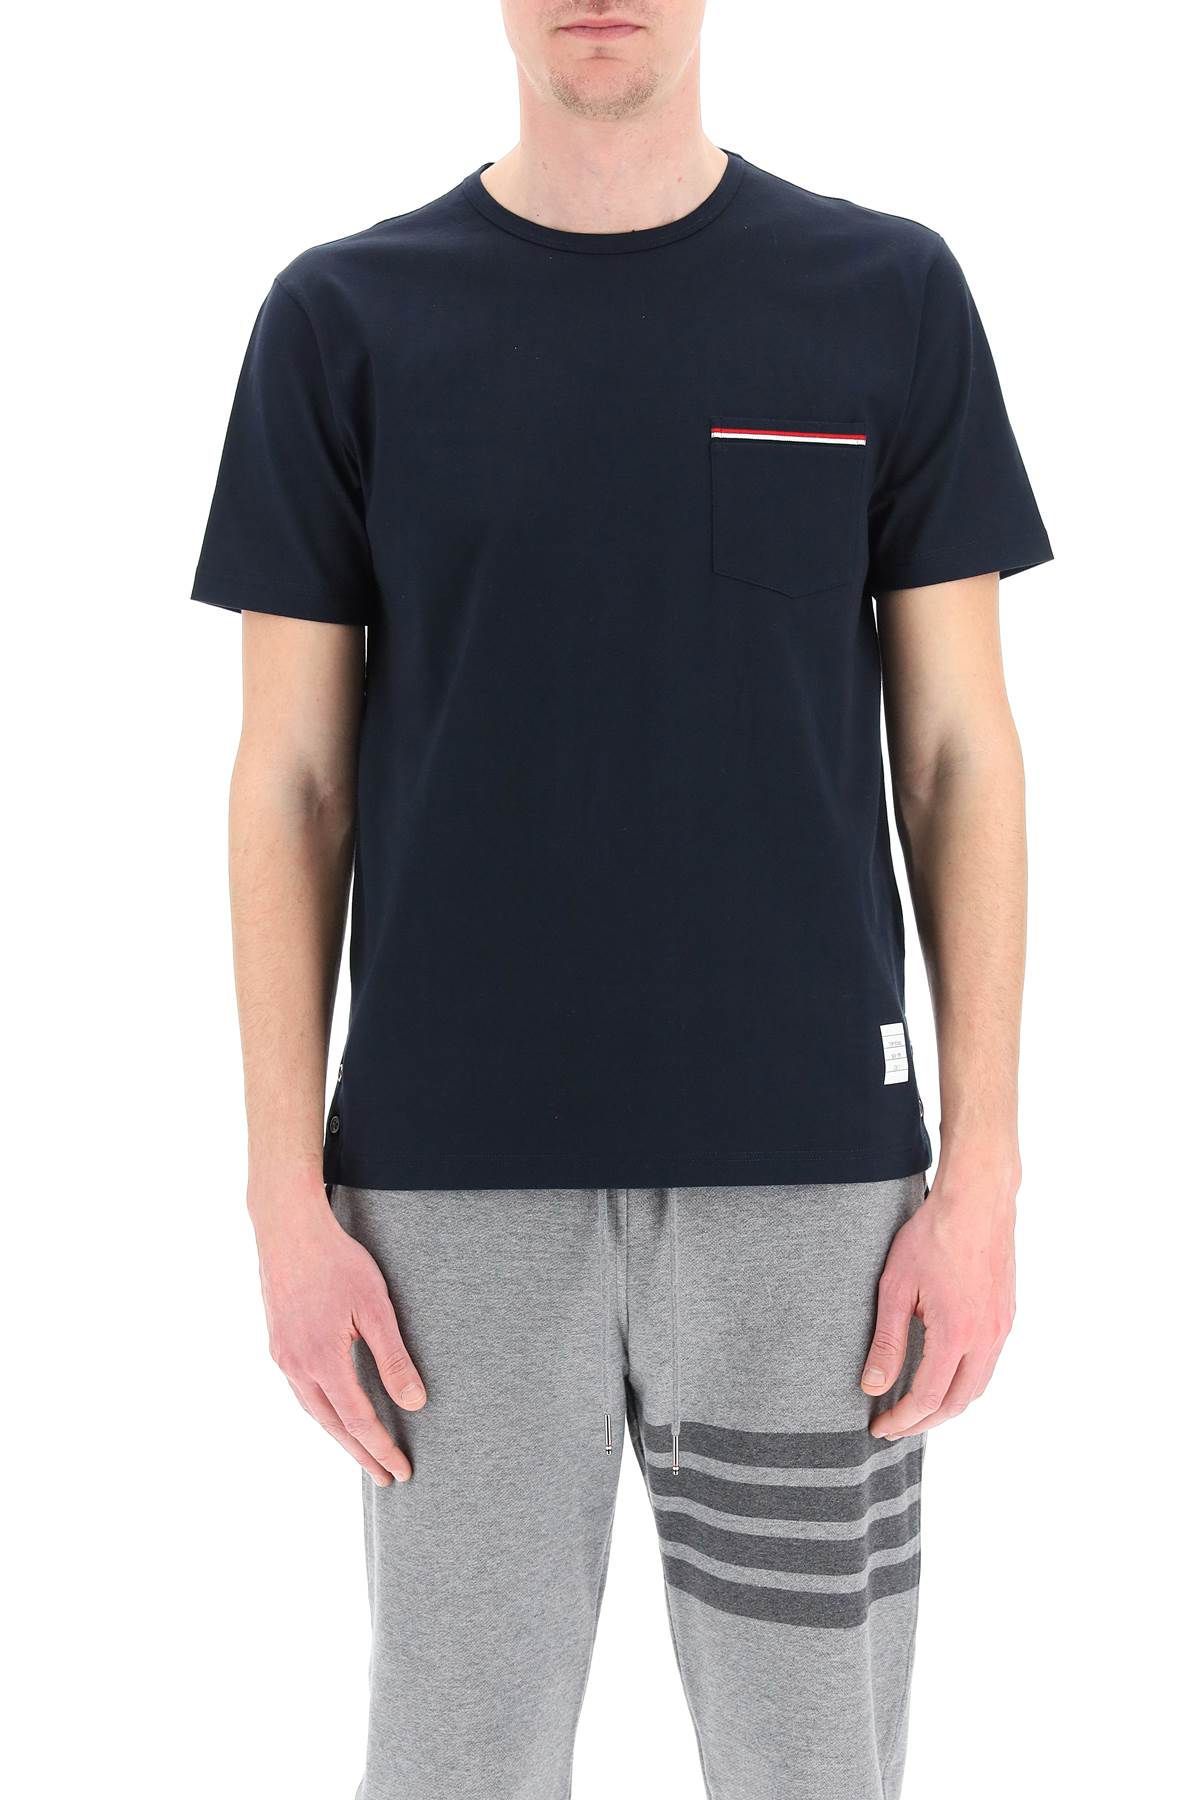 Thom browne t-shirt with tricolor pocket-1